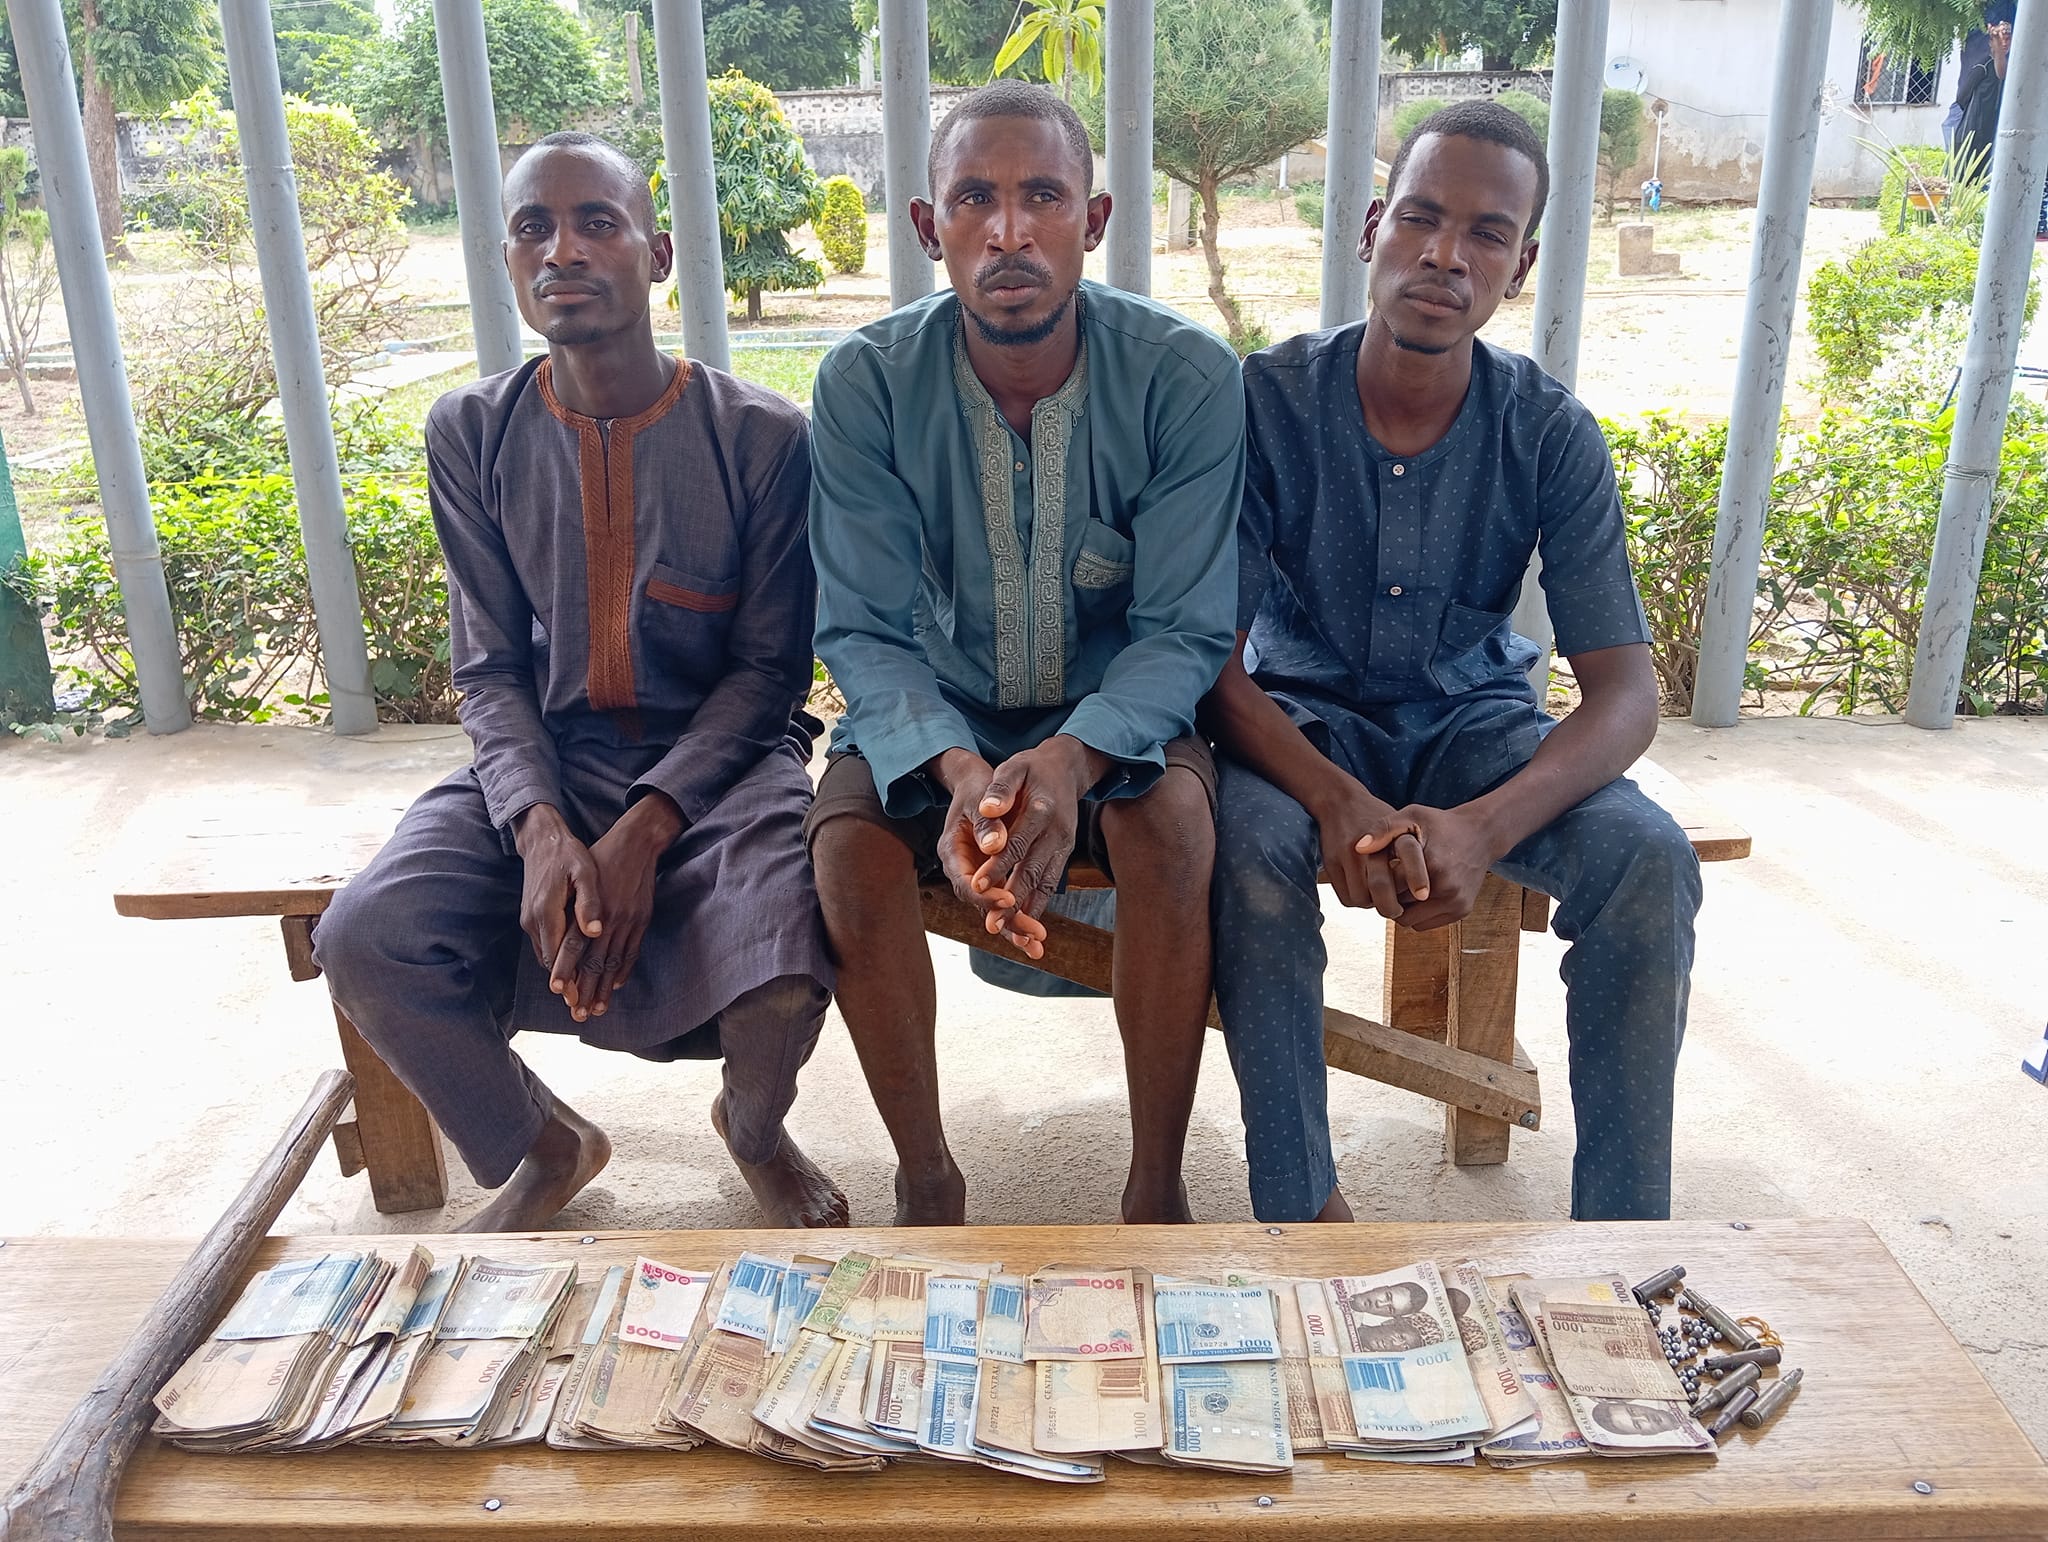 Man conspires with two armed robbers to attack his friend in Kano; cart away N2.9m